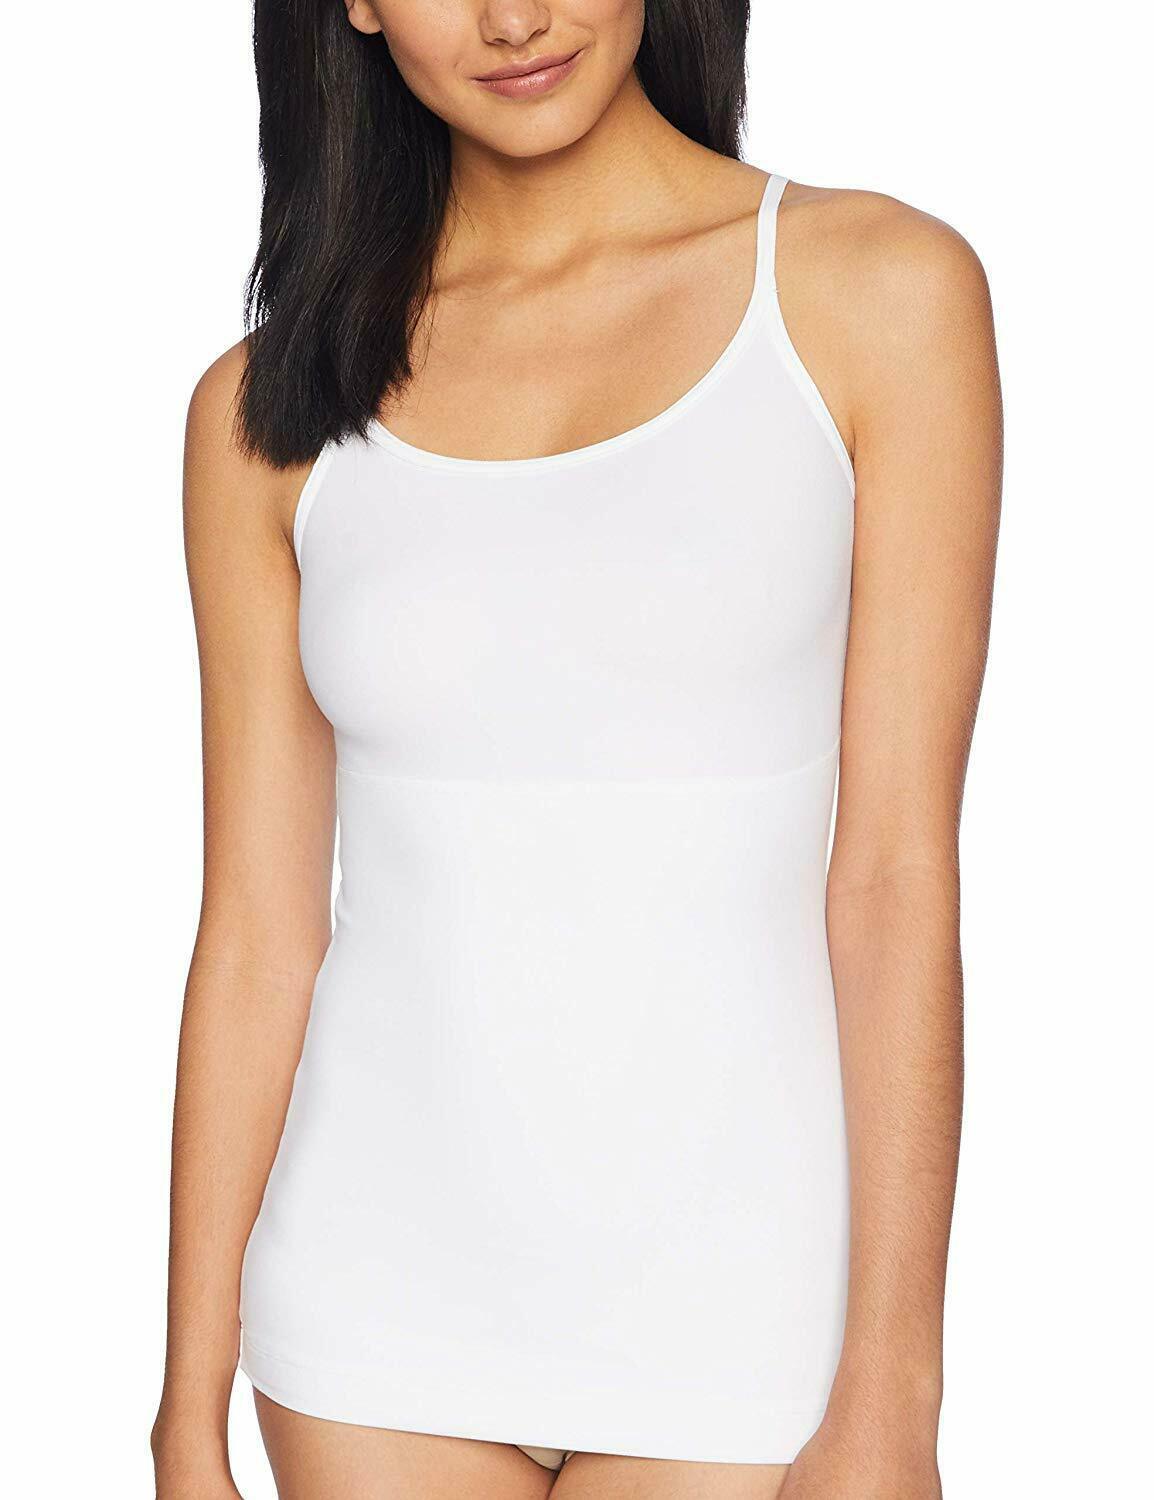 Maidenform WHITE Flexees Fat Free Dressing Tank Top, US Small - Shapers